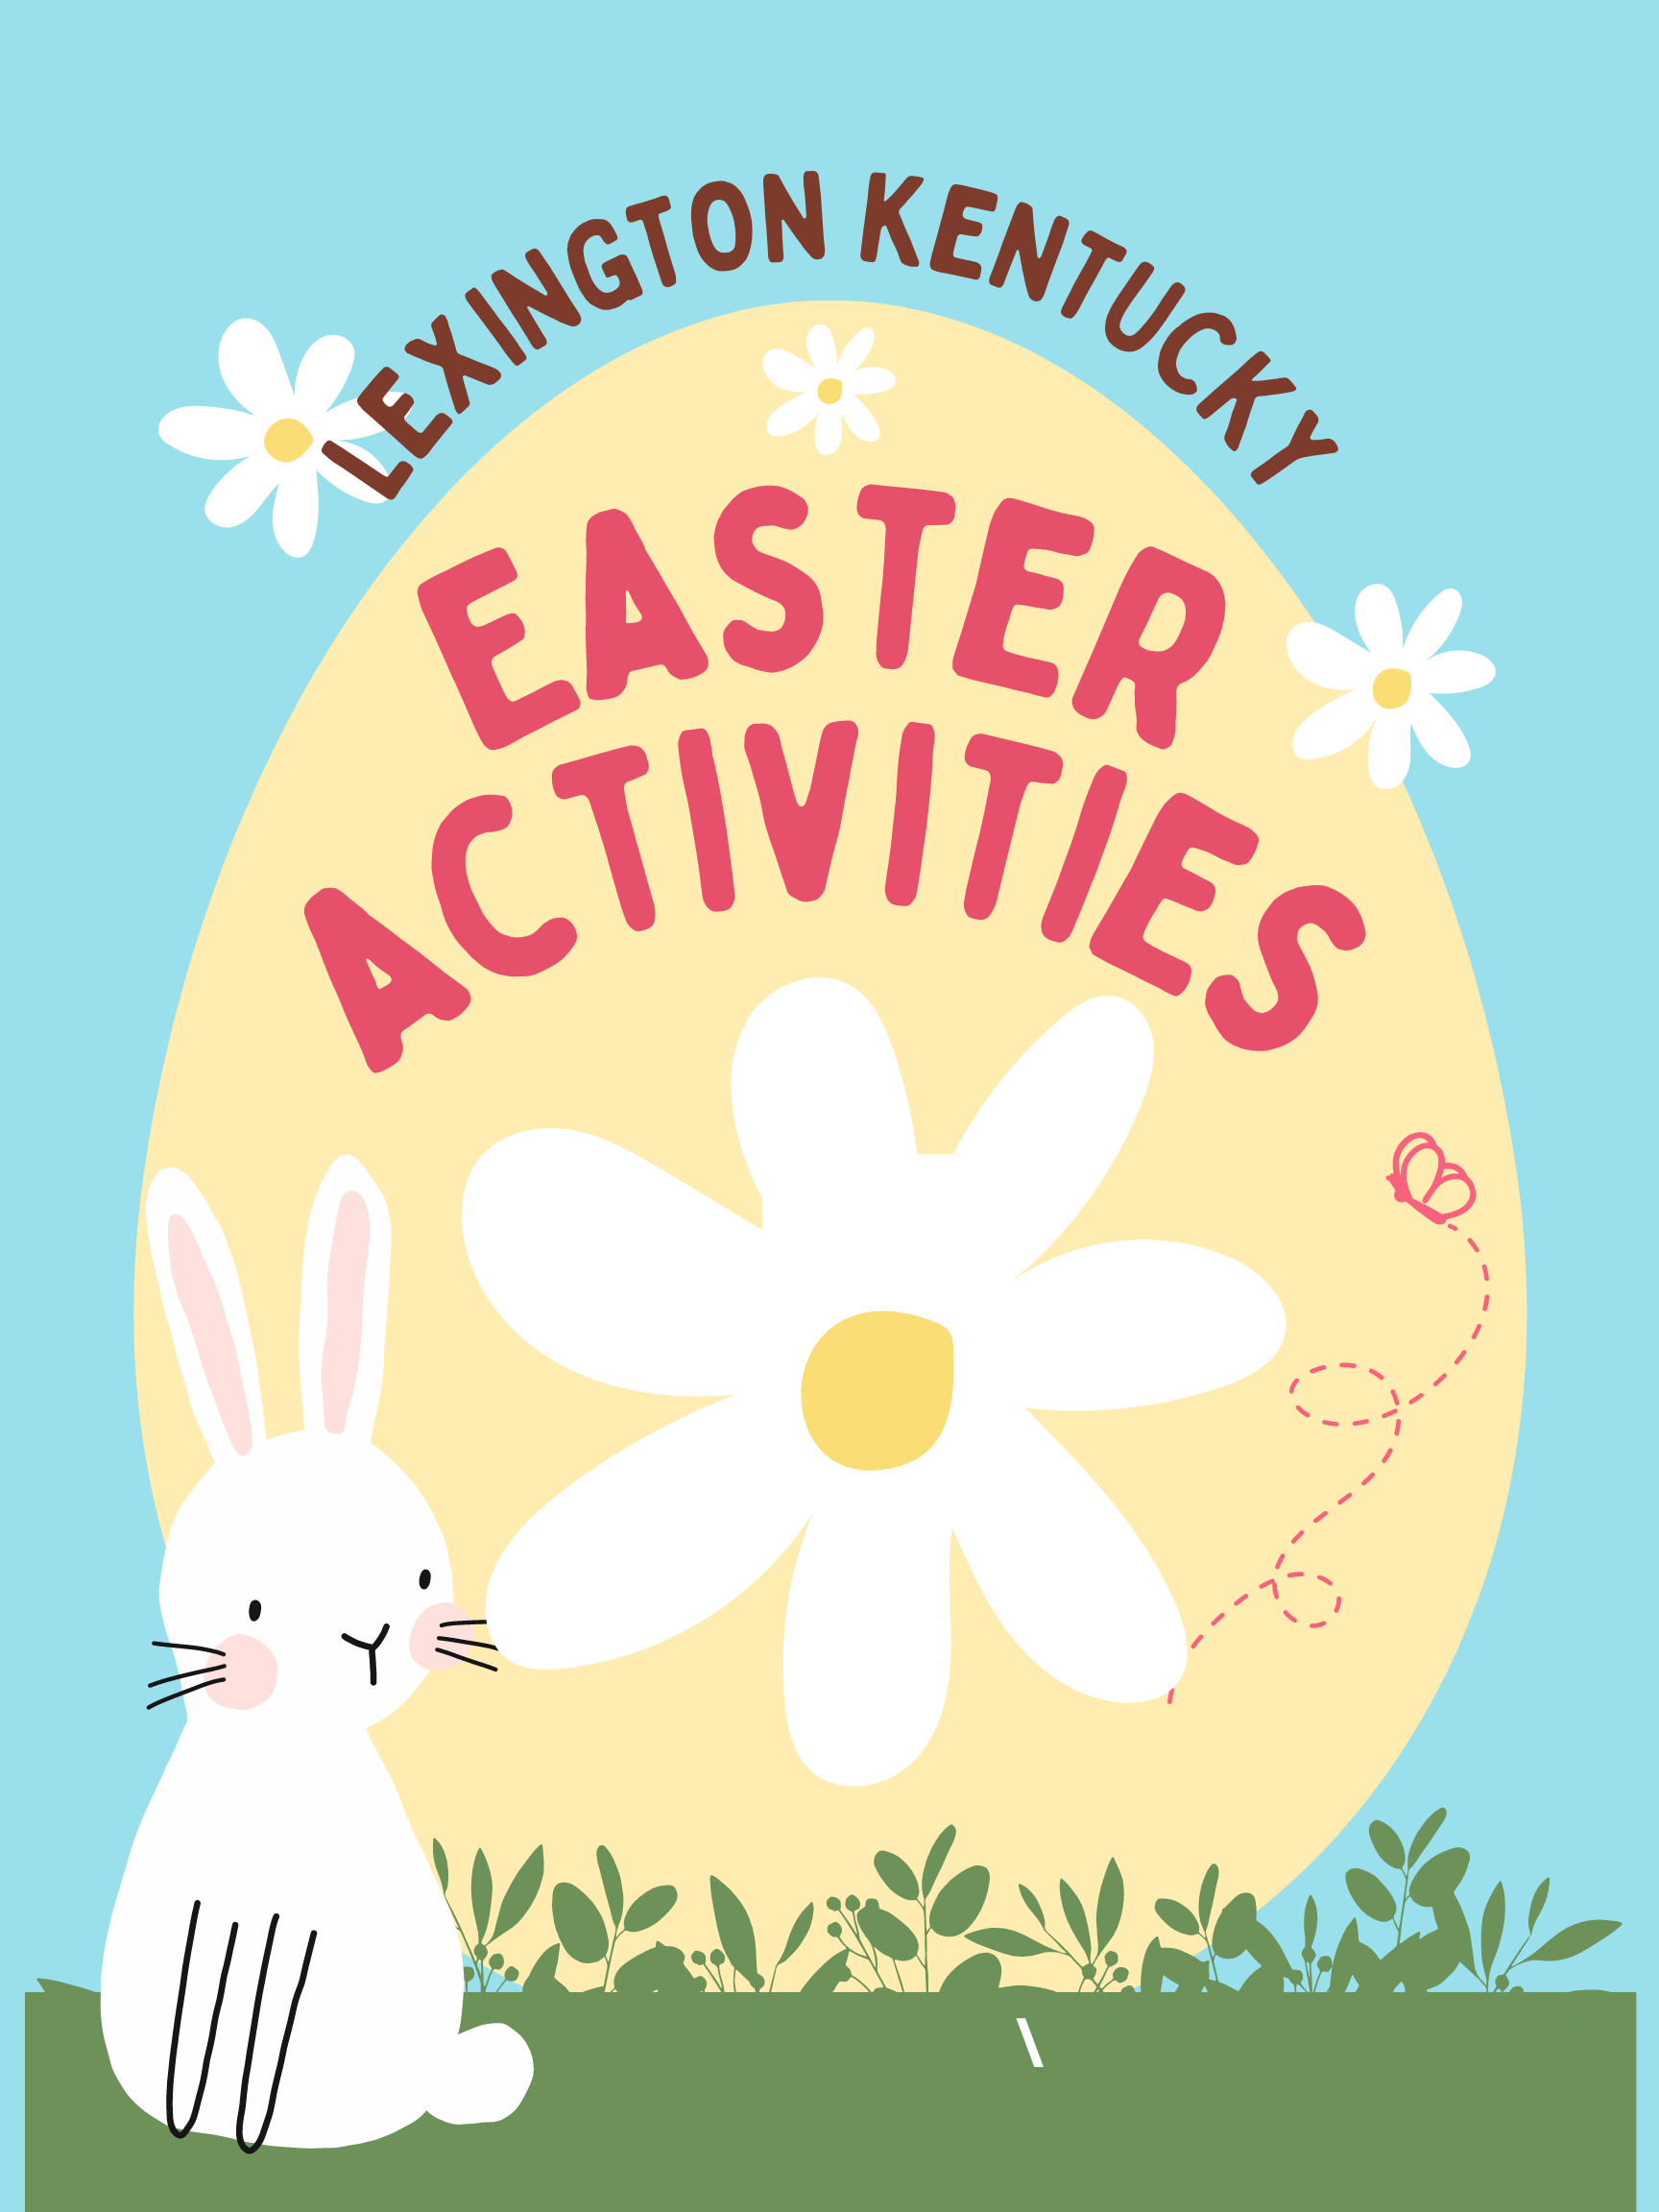 A fun graphic poster of an Easter bunny and an egg waiting for you to read about the fun Lexington Kentucky Easter activities to explore.